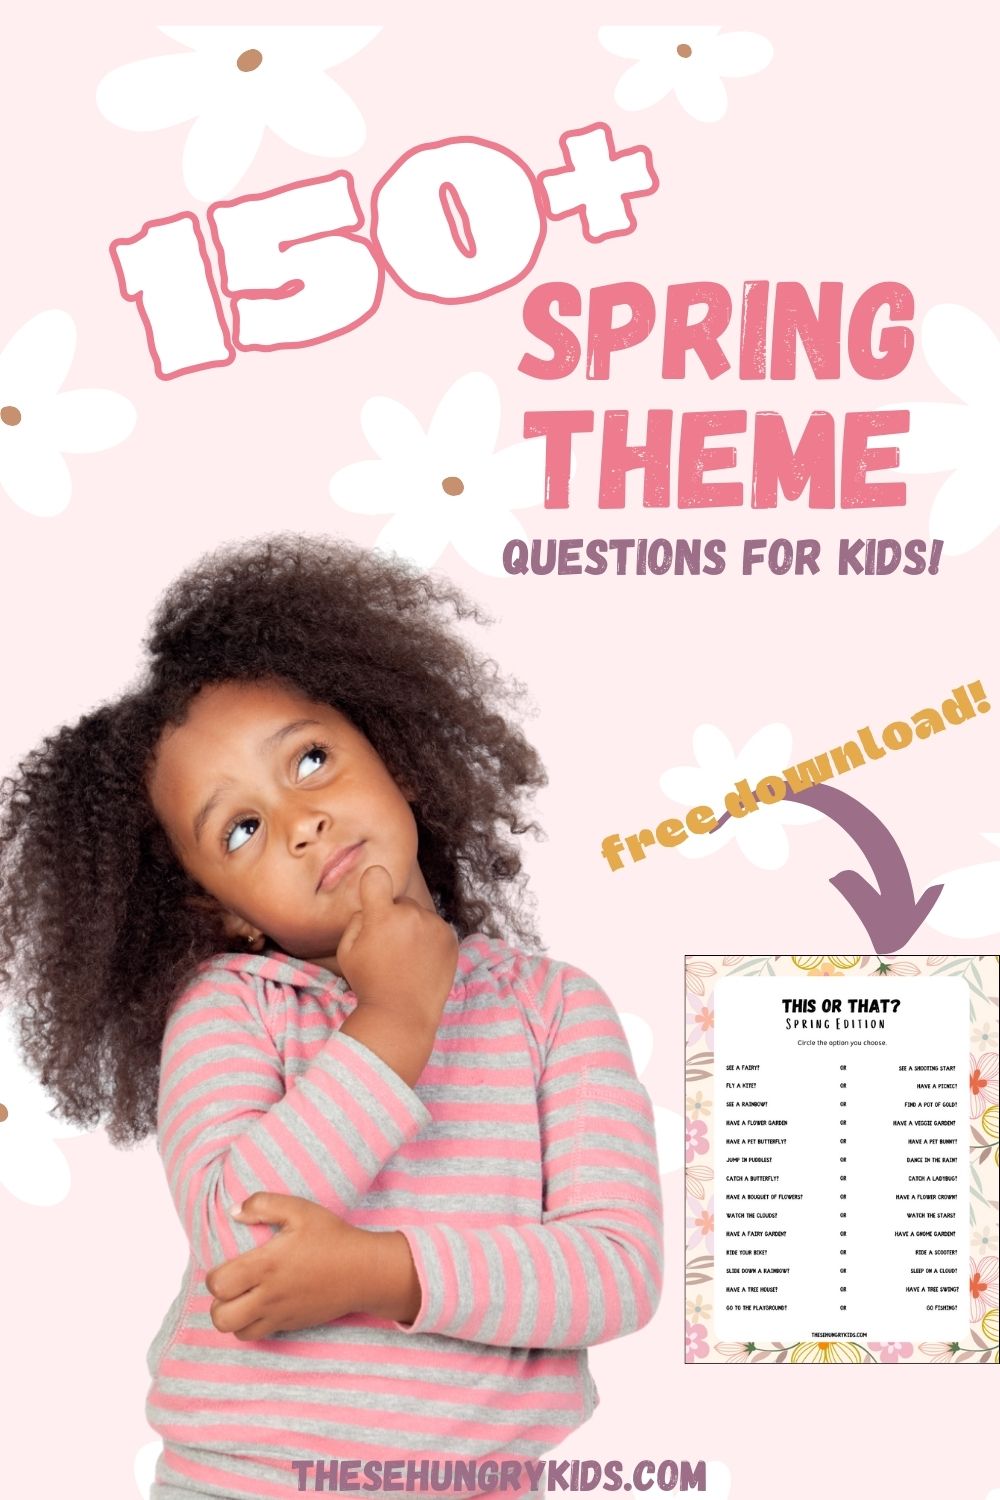 PINK BACKGROUND WITH WHITE FLOWERS THAT SAYS 150+ SPRING THEME QUESTIONS FOR KIDS WITH FREE PRINTABLE WITH A PHOTO OF A GIRL WITH DARK SKIN AND DARK HAIR THINKING AND HOLDING HER CHIN